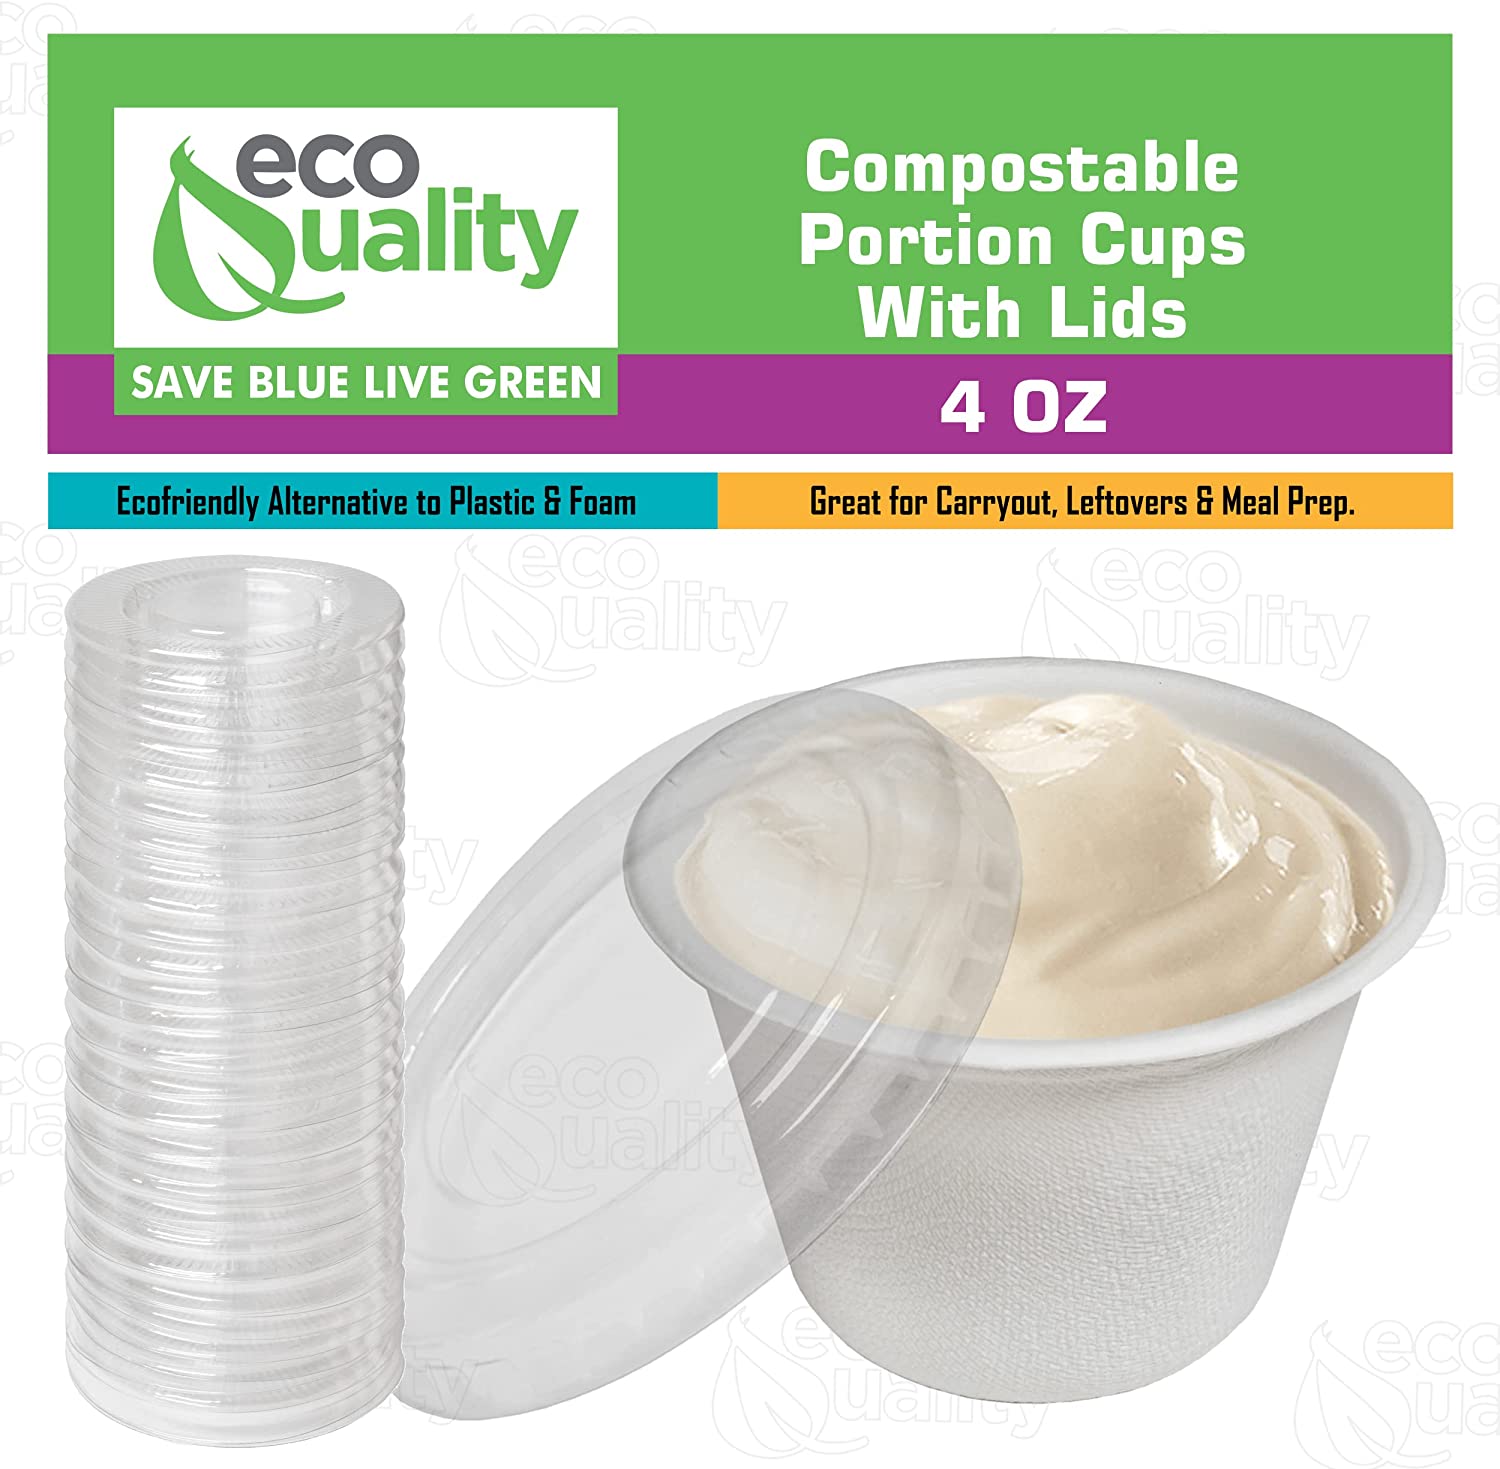 White Compostable Portion Cups with Lids, Biodegradable, Perfect for Disposable Sample Cups, TakeOut, Souffle, Salad Dressing, Condiments, Jello